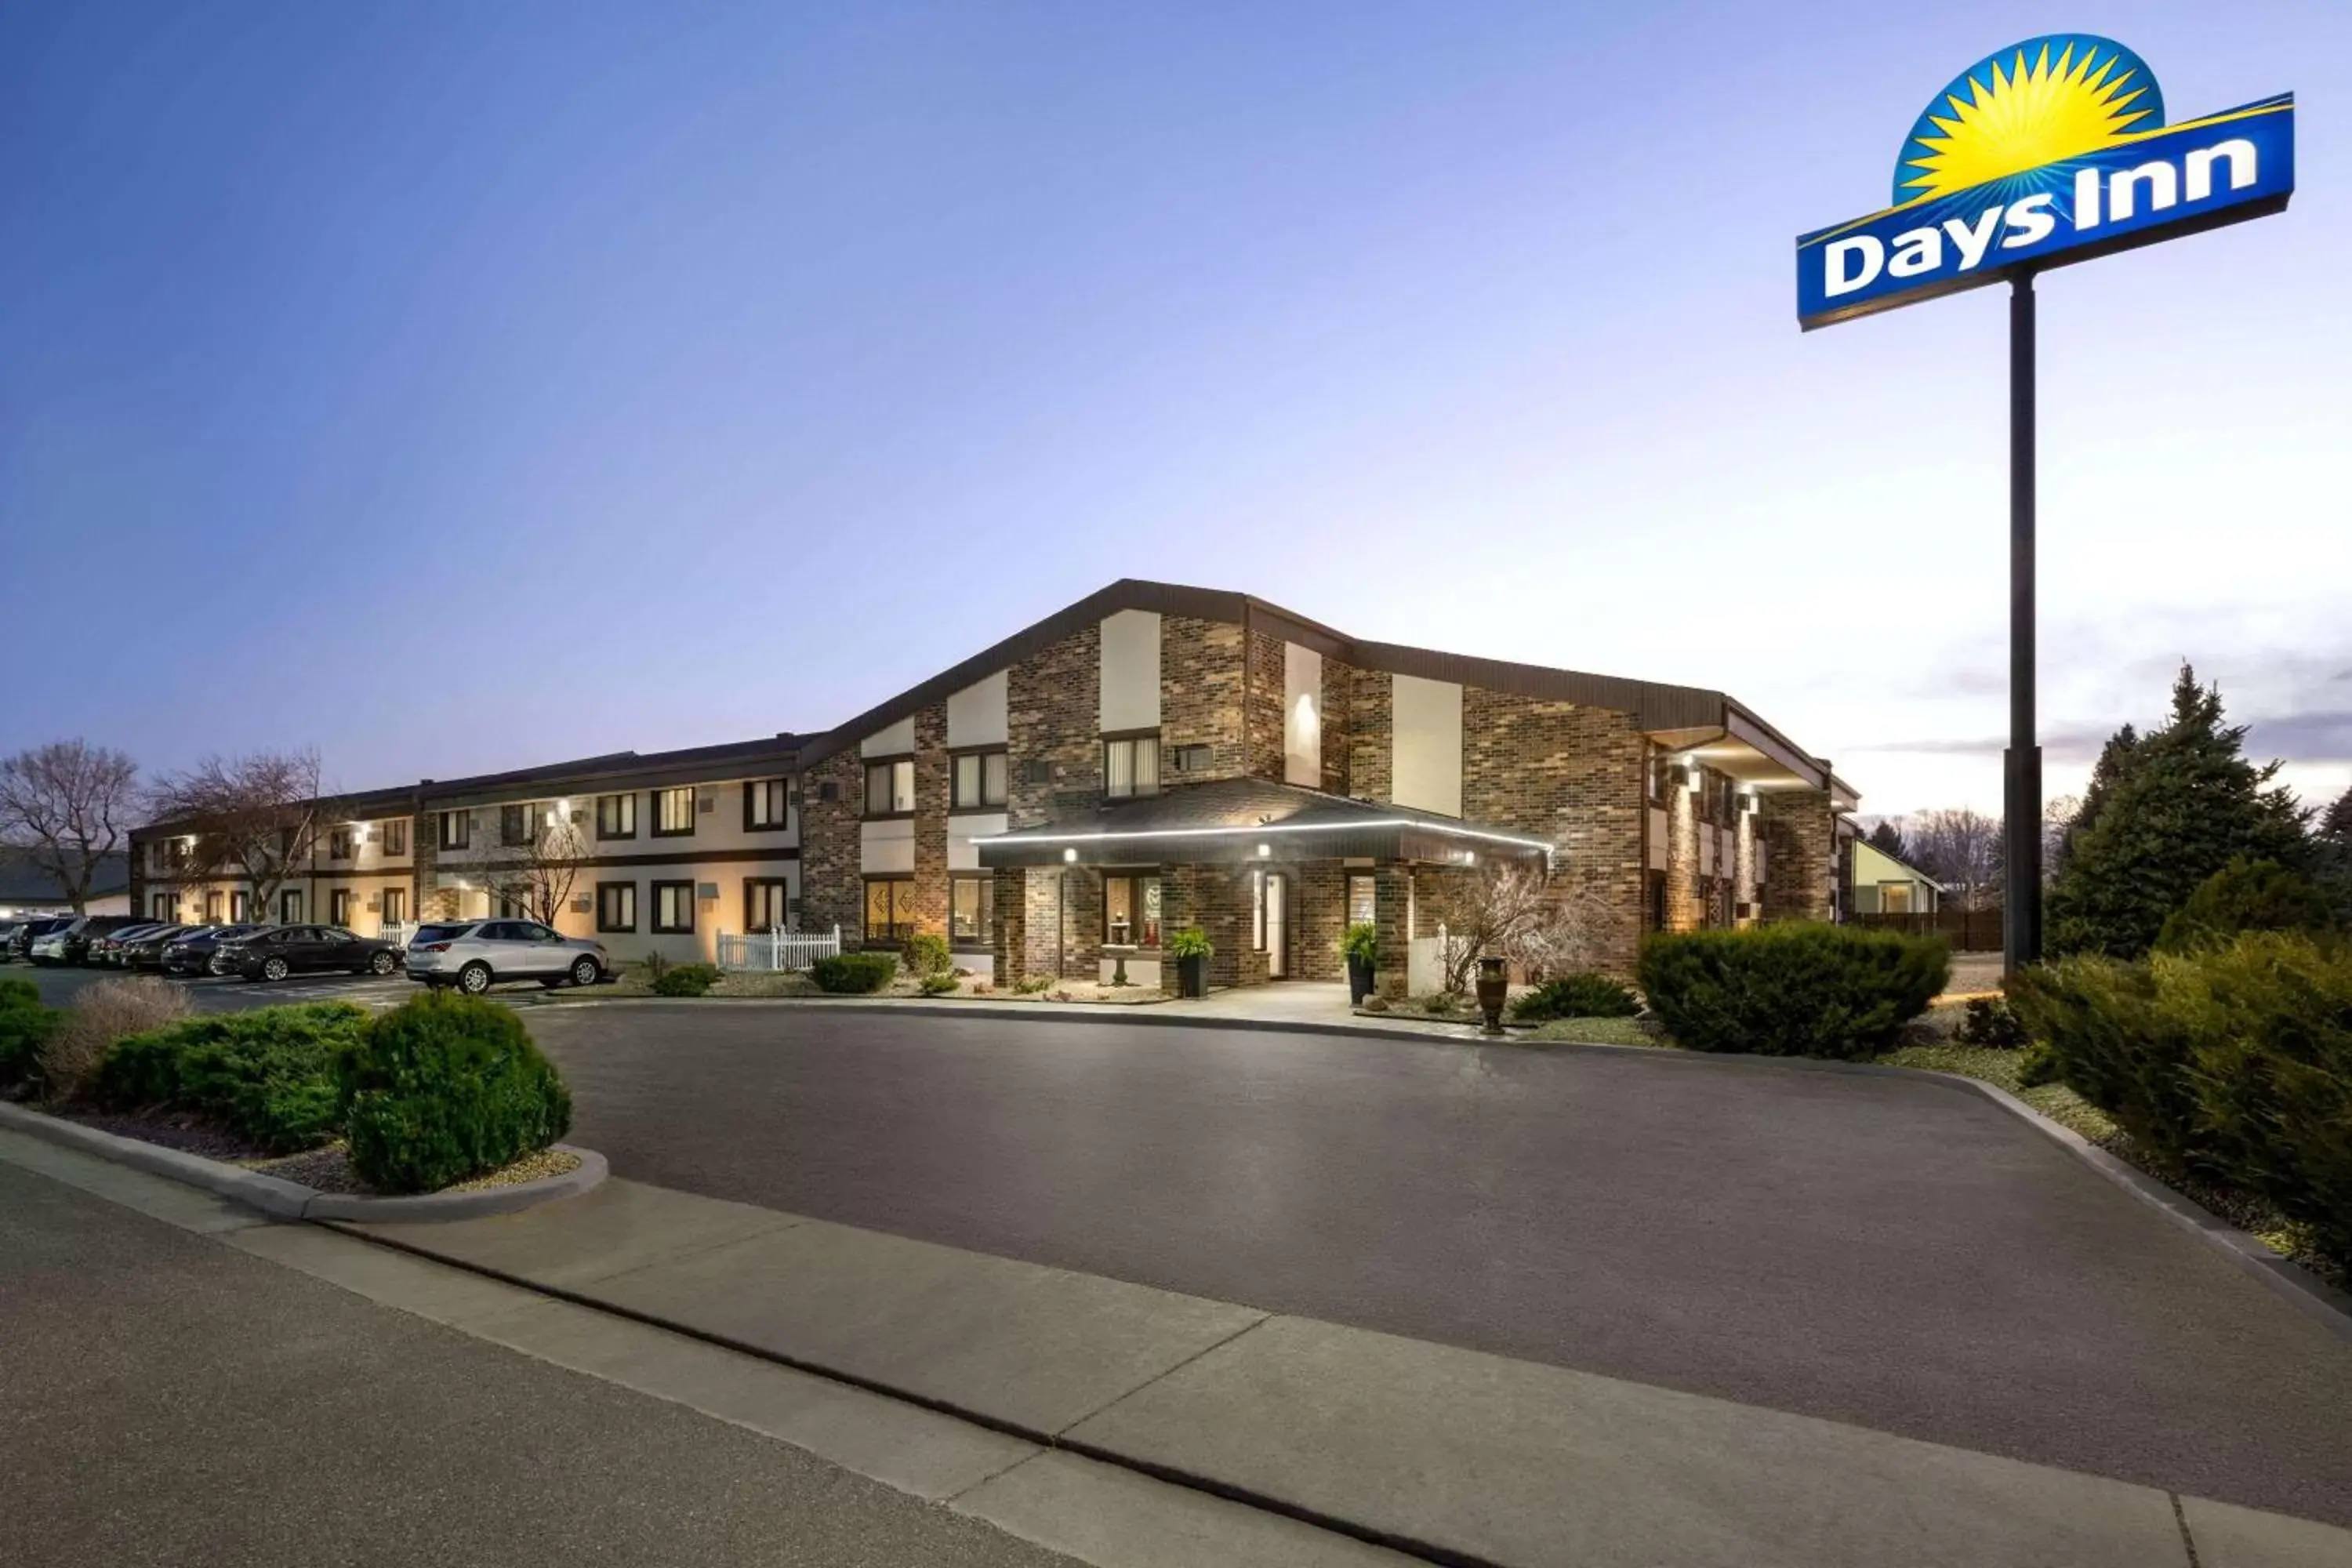 Property Building in Days Inn by Wyndham Fort Collins